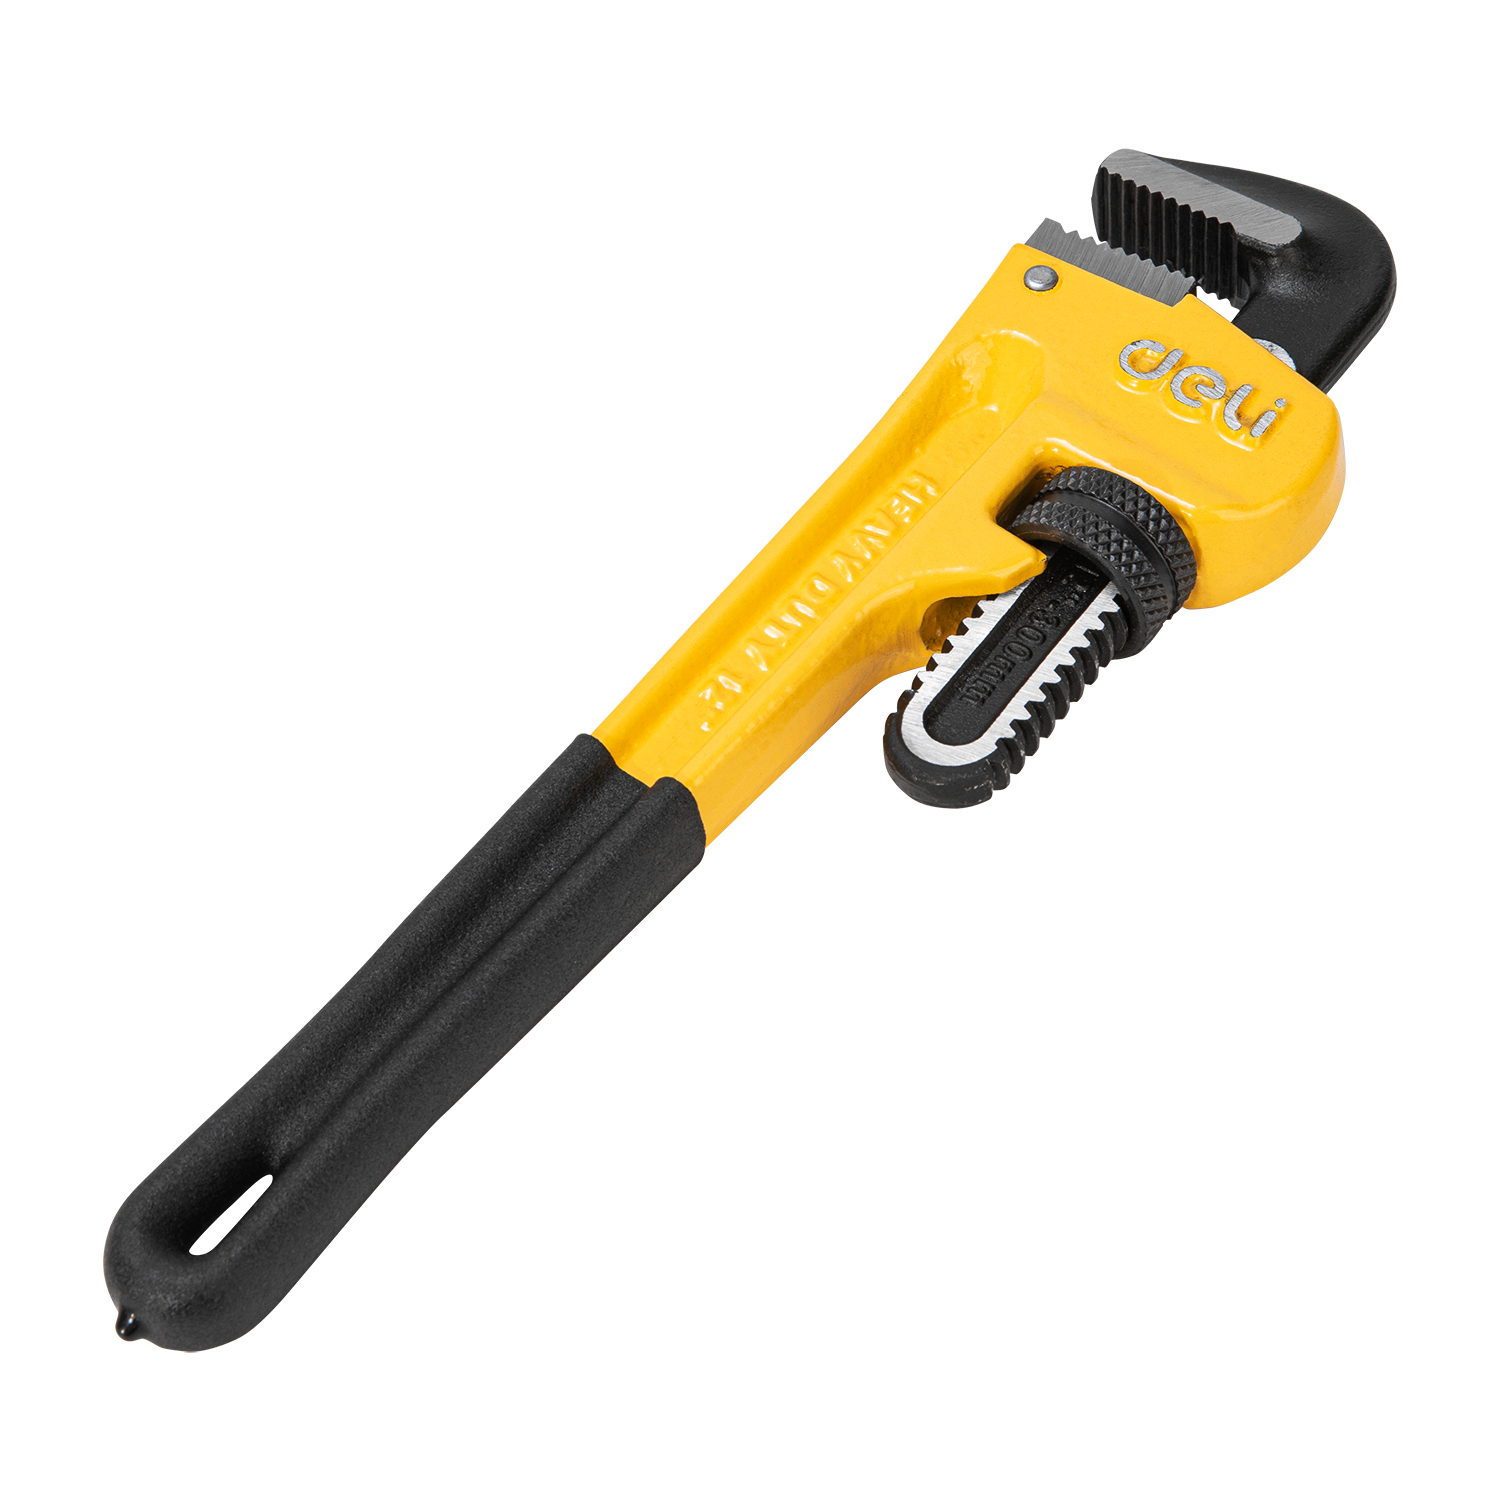 Craftsman Pipe Wrench with valve wrench for tight spaces